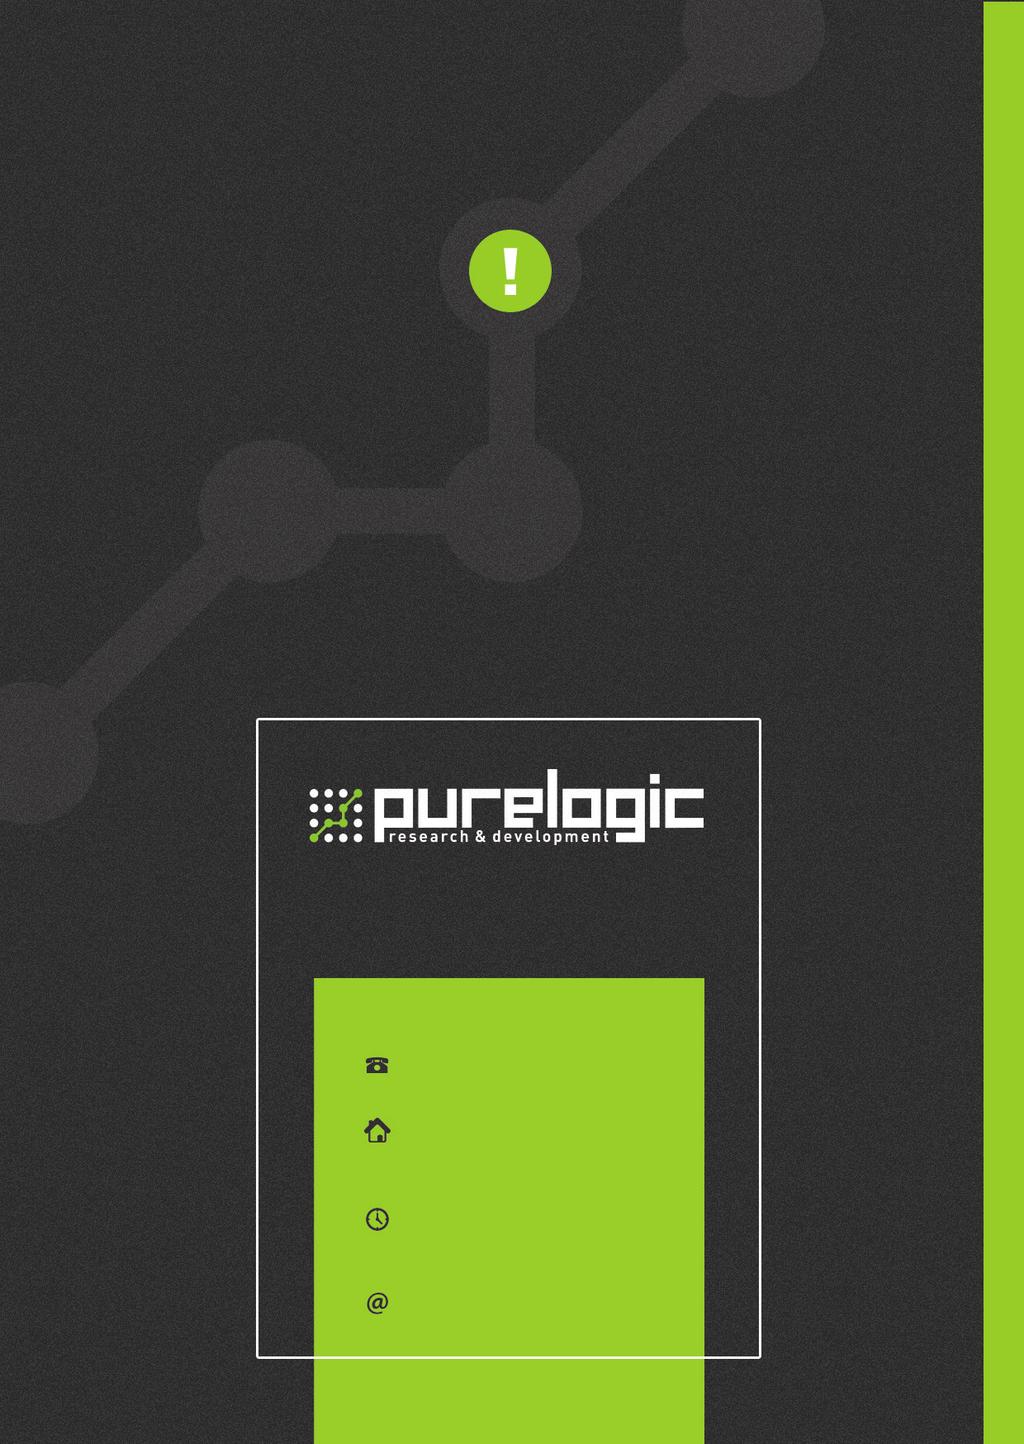 Please, be aware that the documentation may be changed due to permanent technical improvement of the products. The latest versions are available for downloading from our web site www.purelogic.ru www.